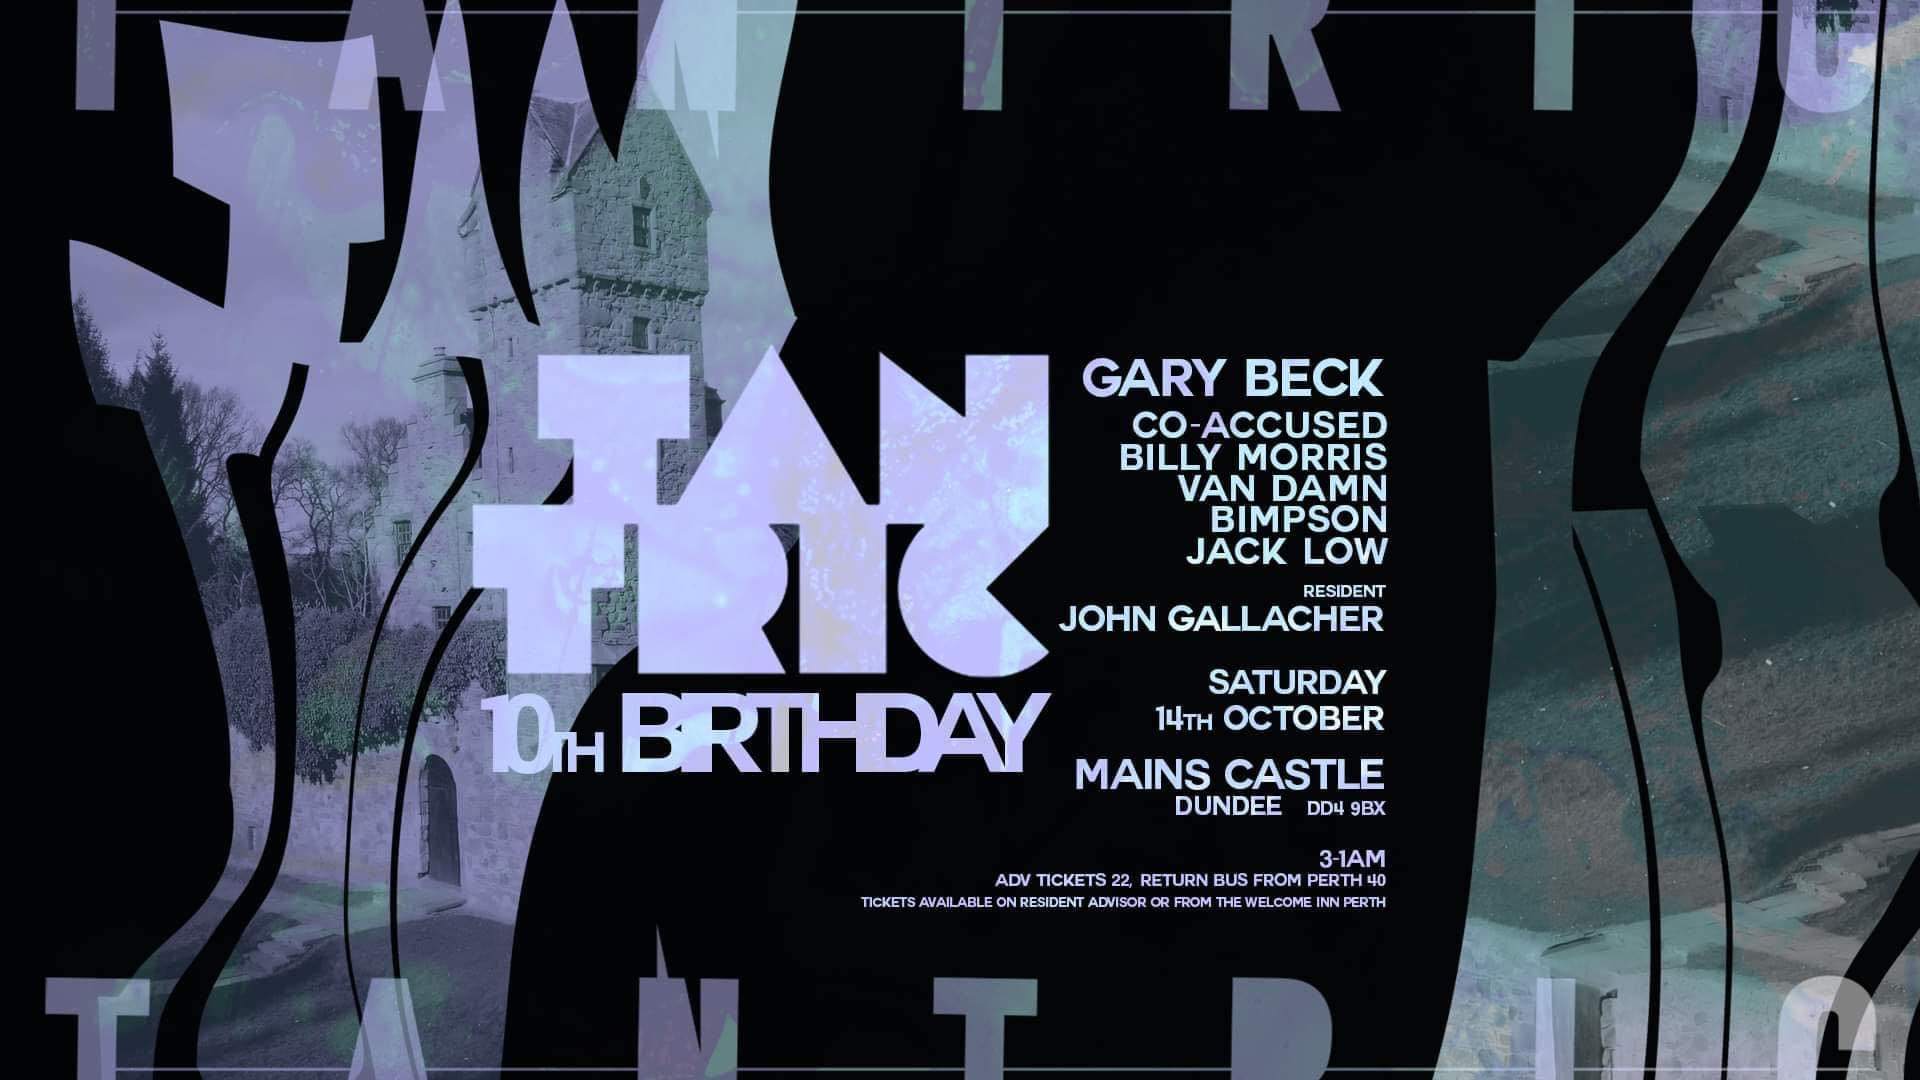 Tantric 10th Birthday Special with Gary Beck - フライヤー裏